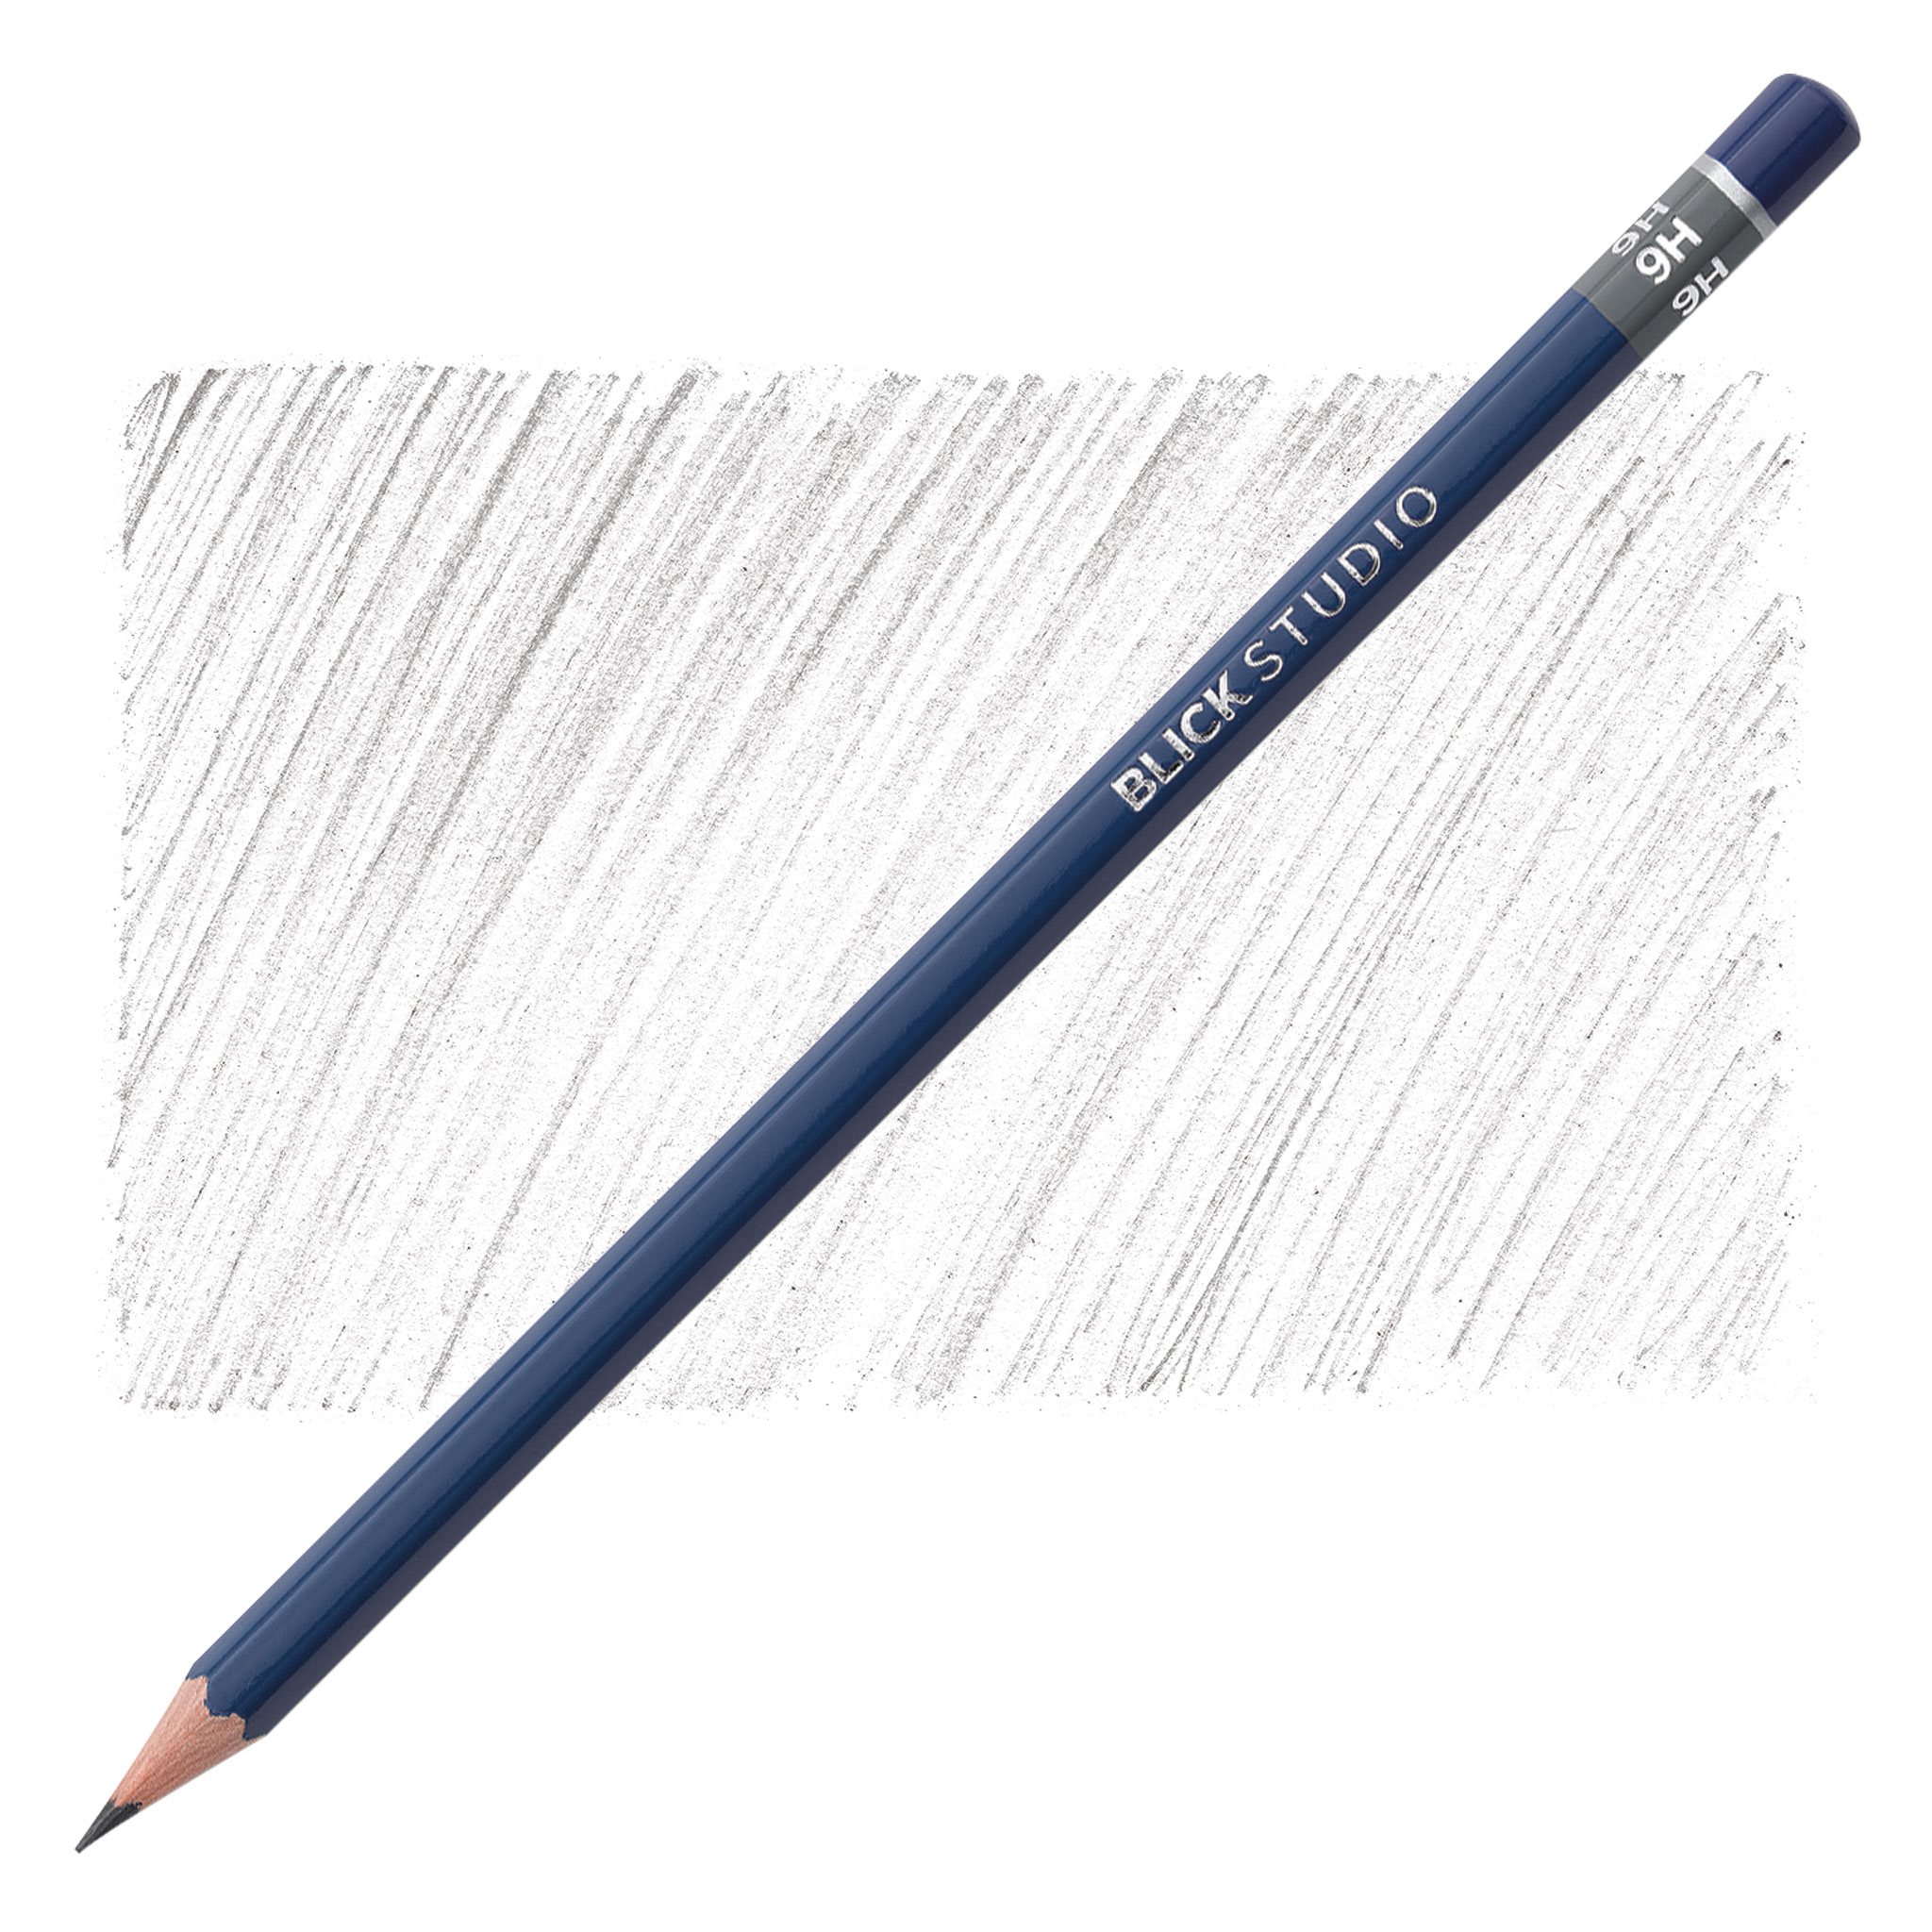 Drawing Sketching Pencil Set In Tin 12 peice Graphite Pencils 8B-2H  Professional